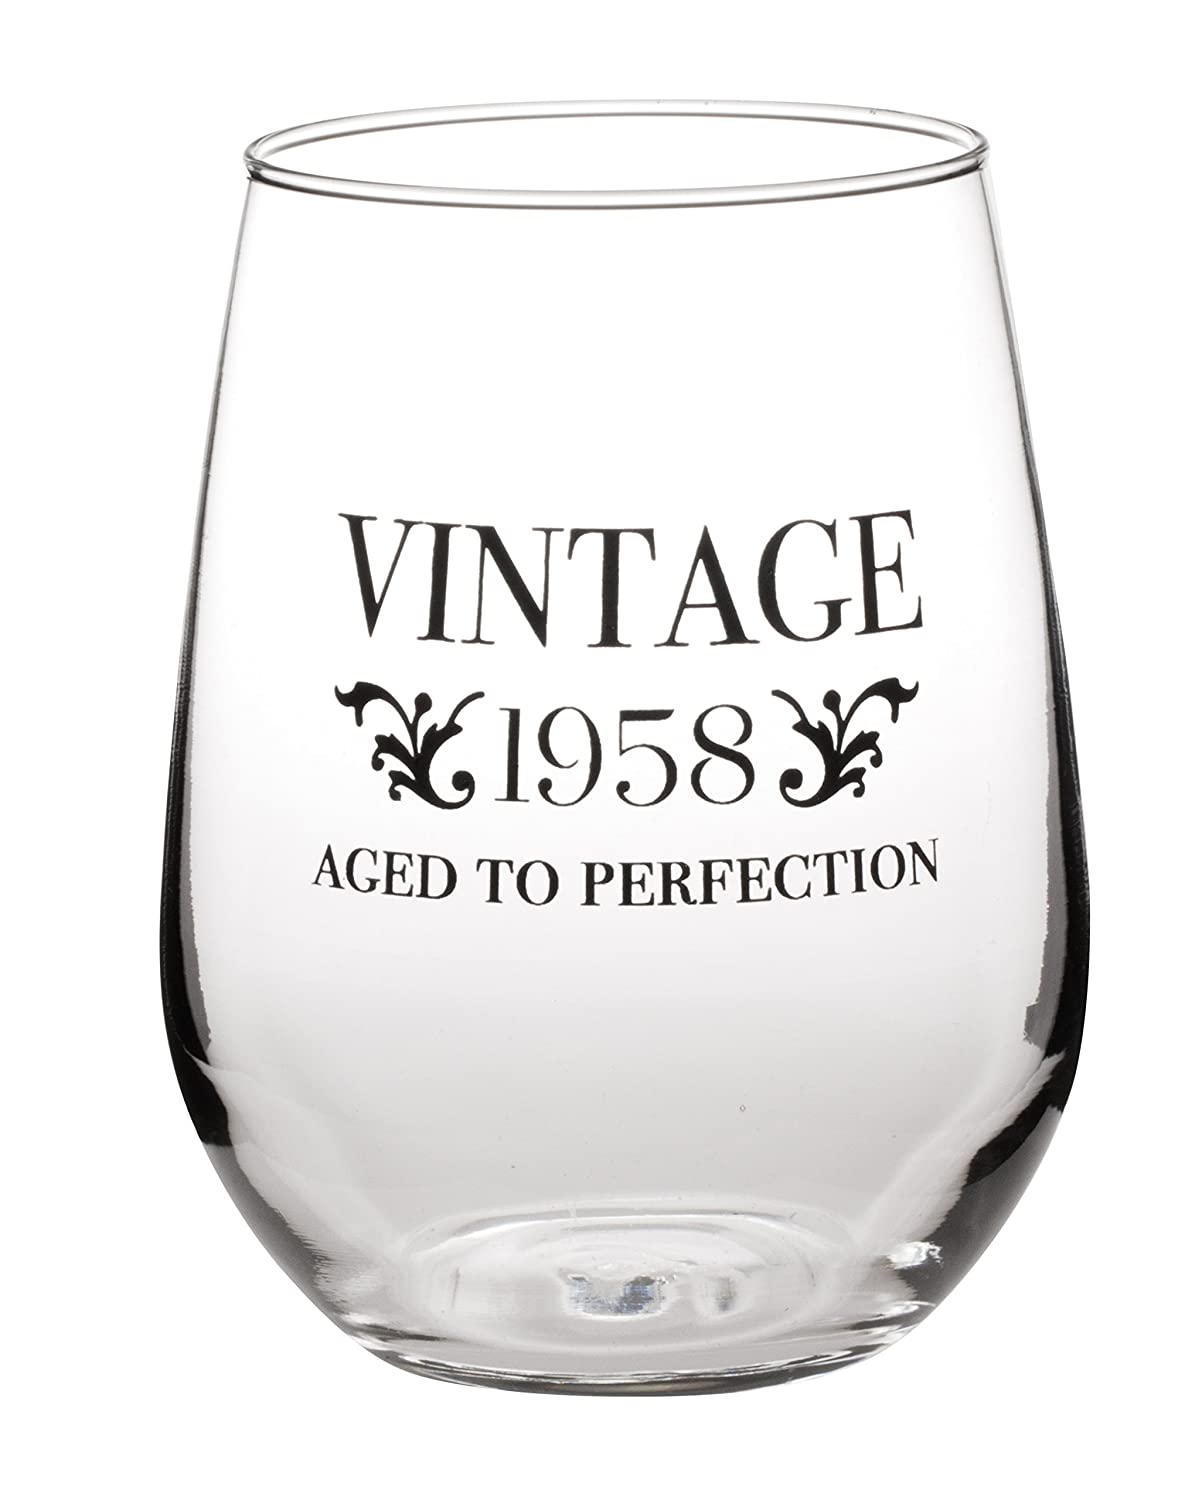 A Vintage Aged to perfection Wine Glass